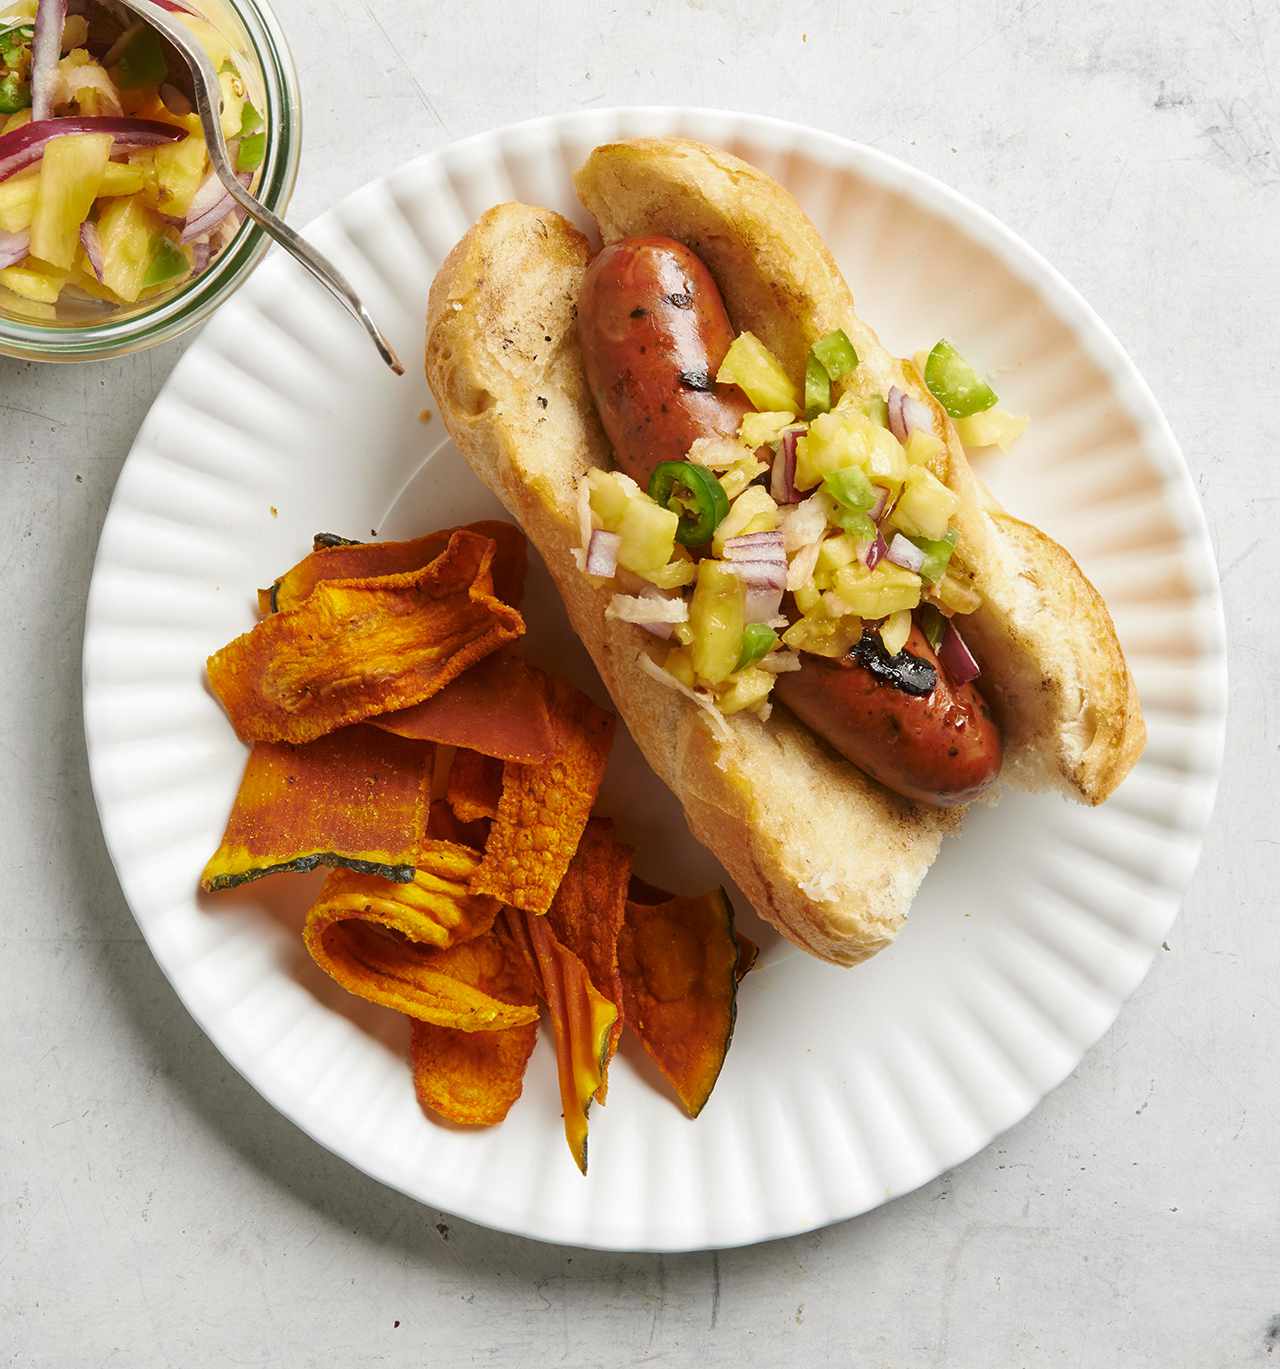 Chicken Sausages with Pineapple Relish